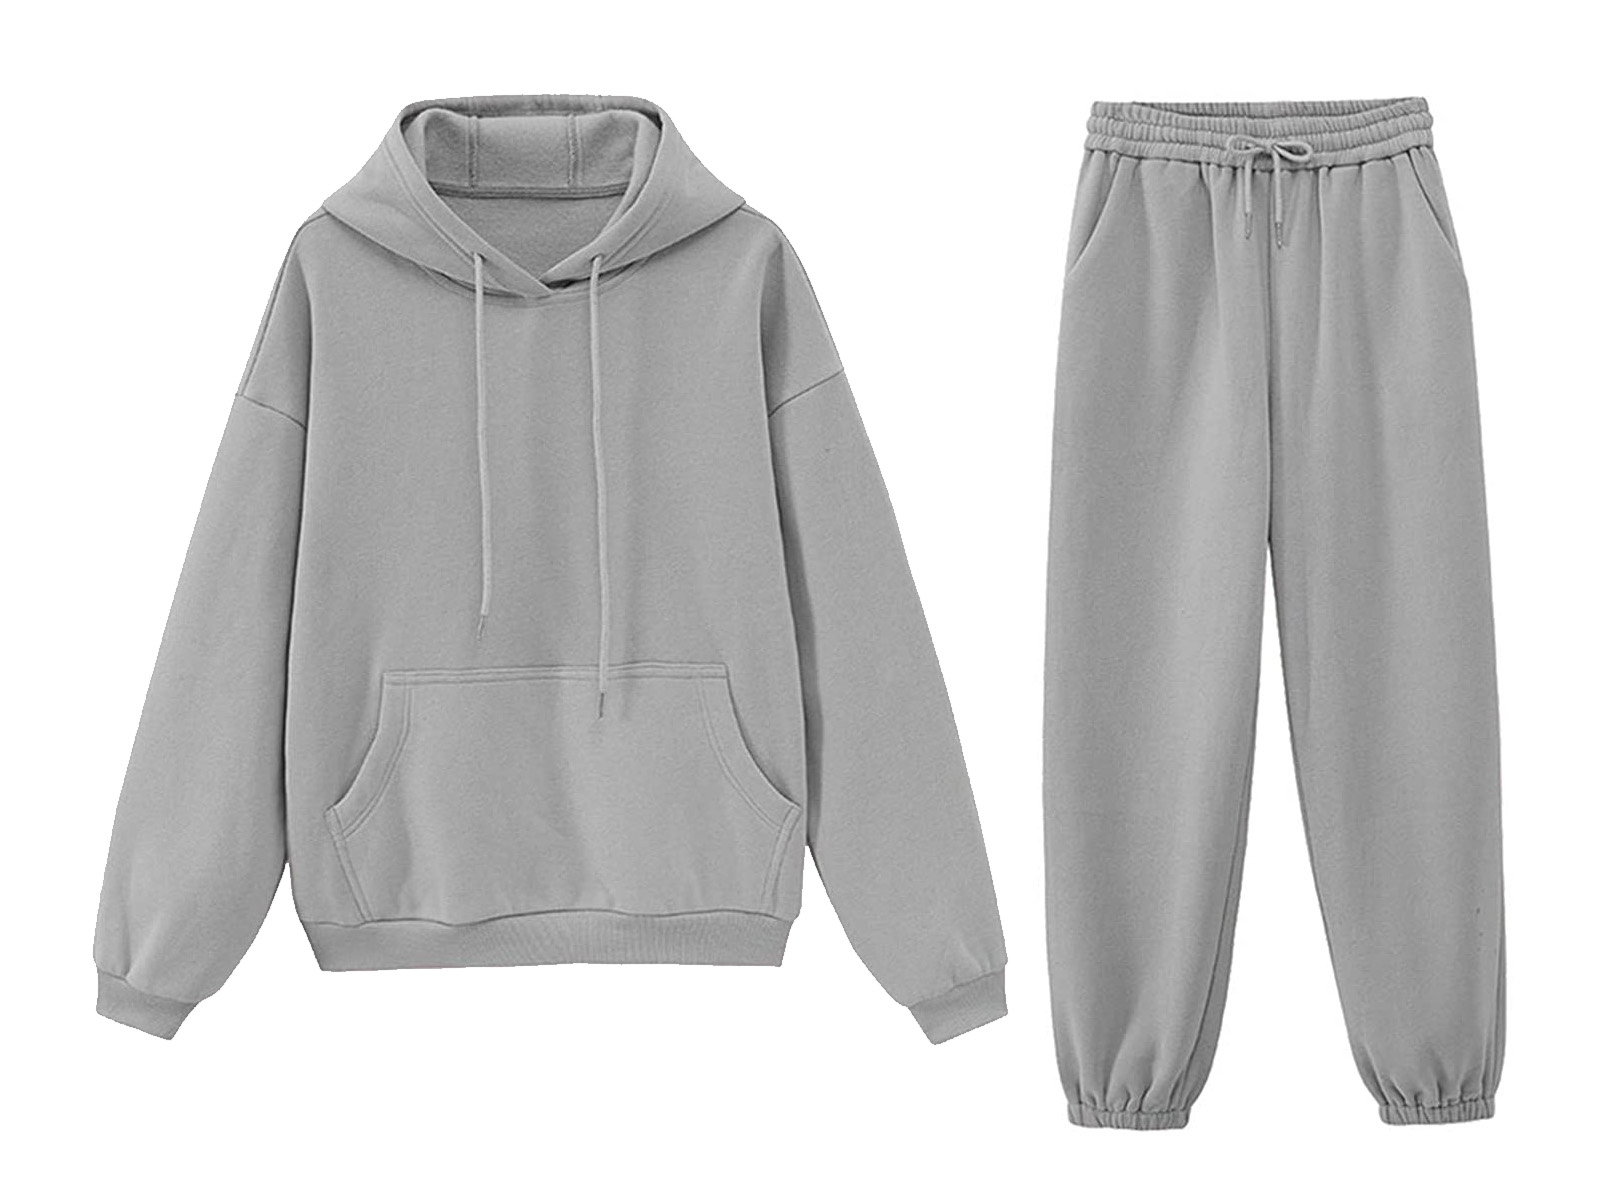 Women 2 Piece Outfits Plain Blank Stylish Hooded Tracksuit Jogging Grey ...